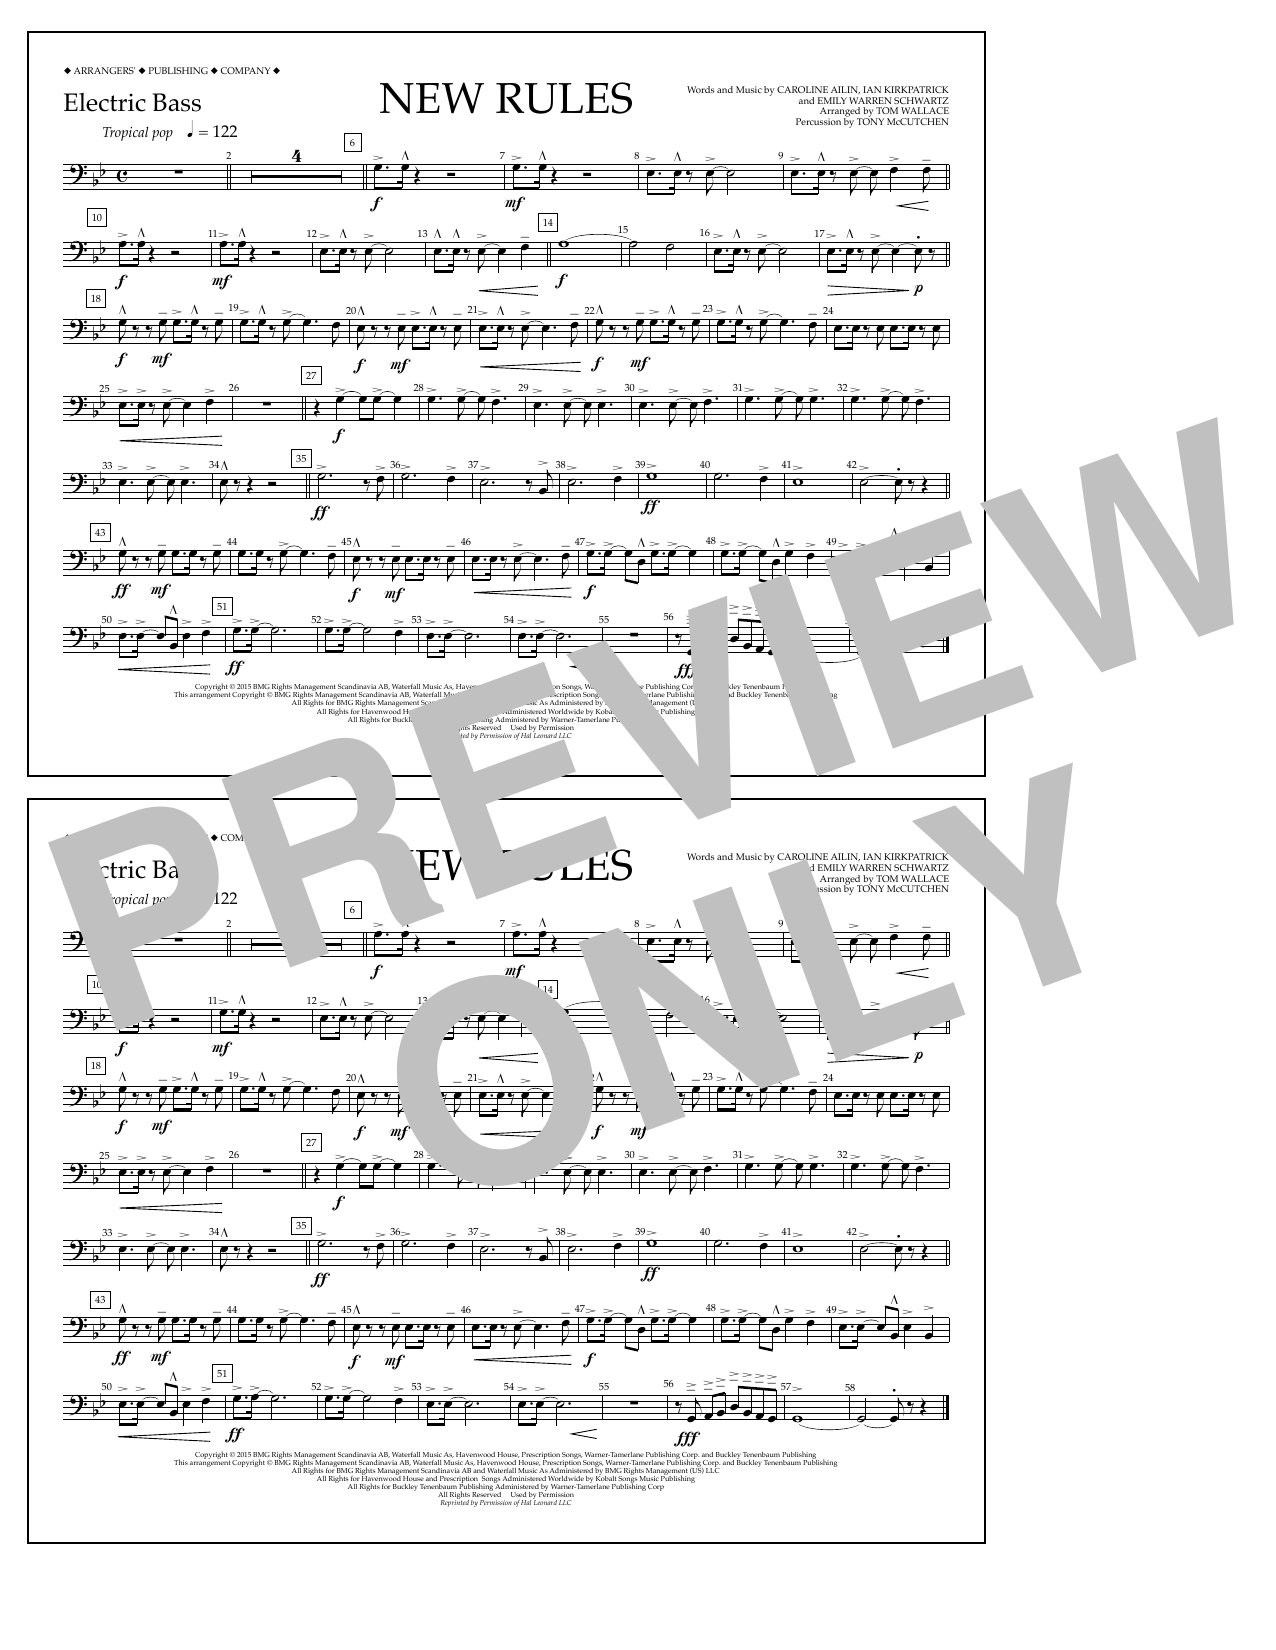 Download Tom Wallace New Rules - Electric Bass Sheet Music